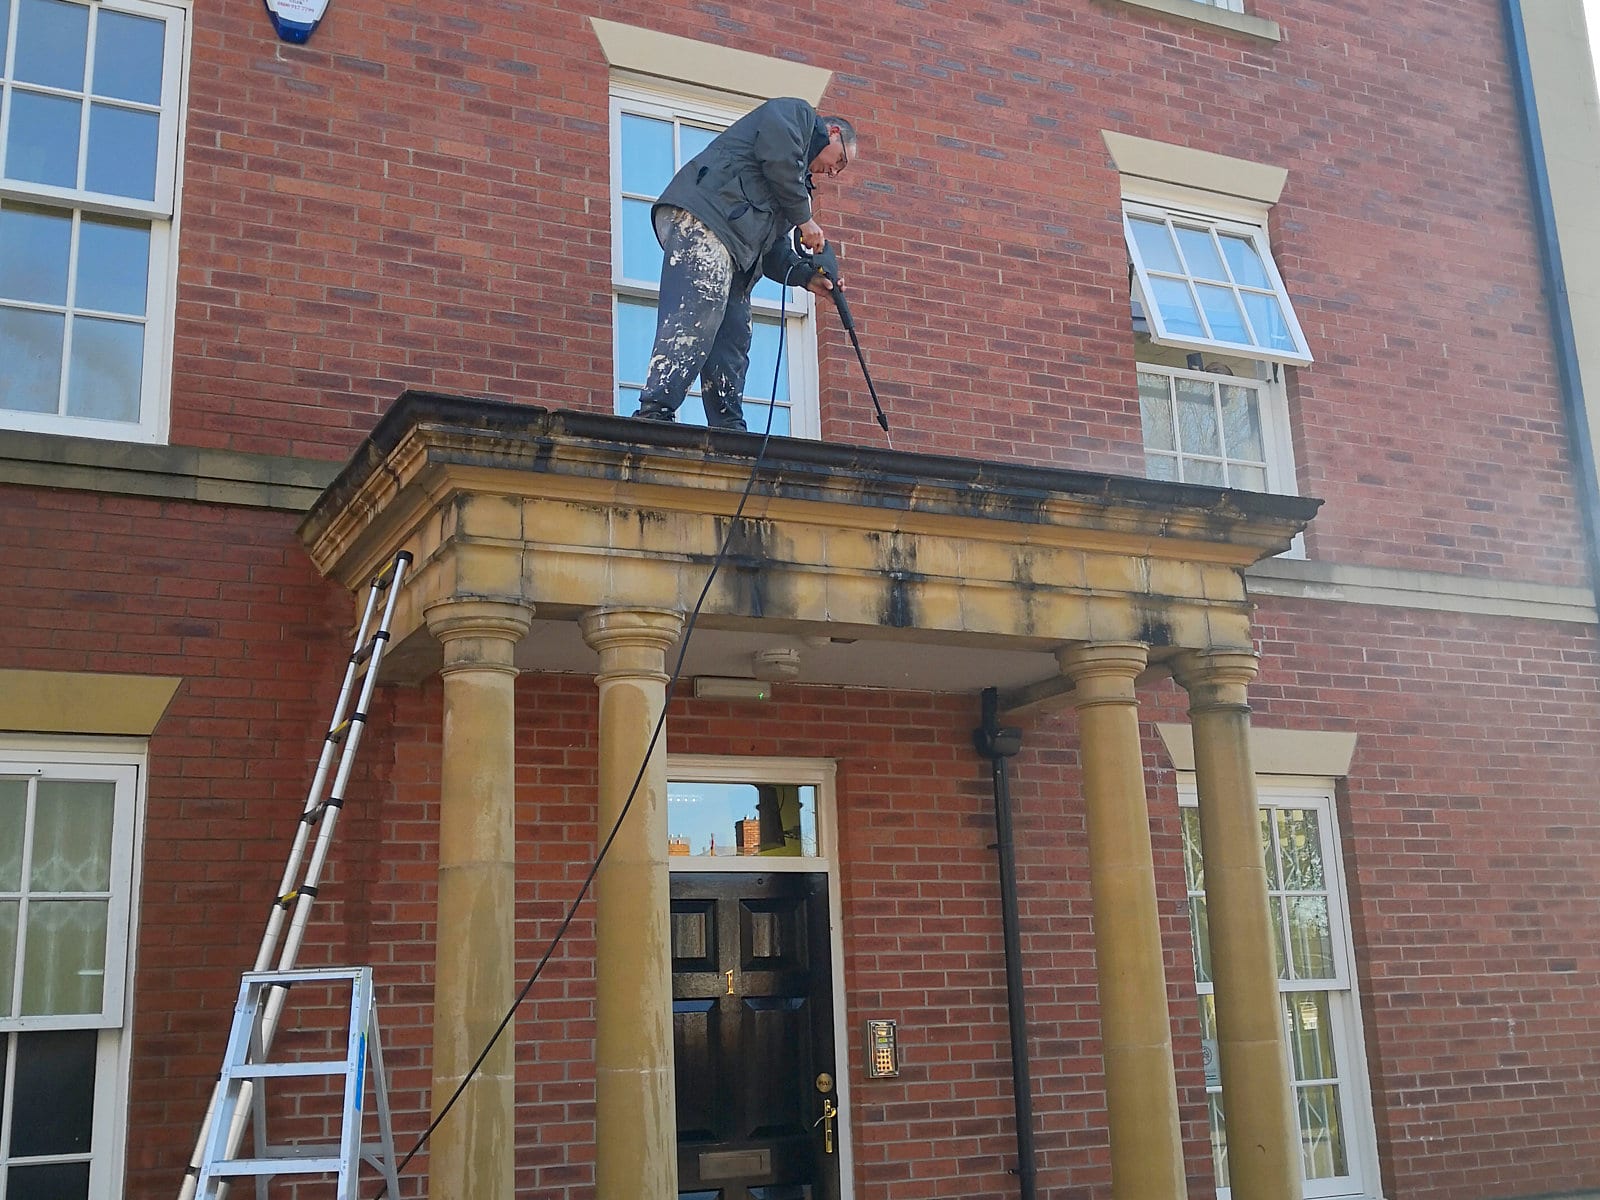 External stone work being cleaned